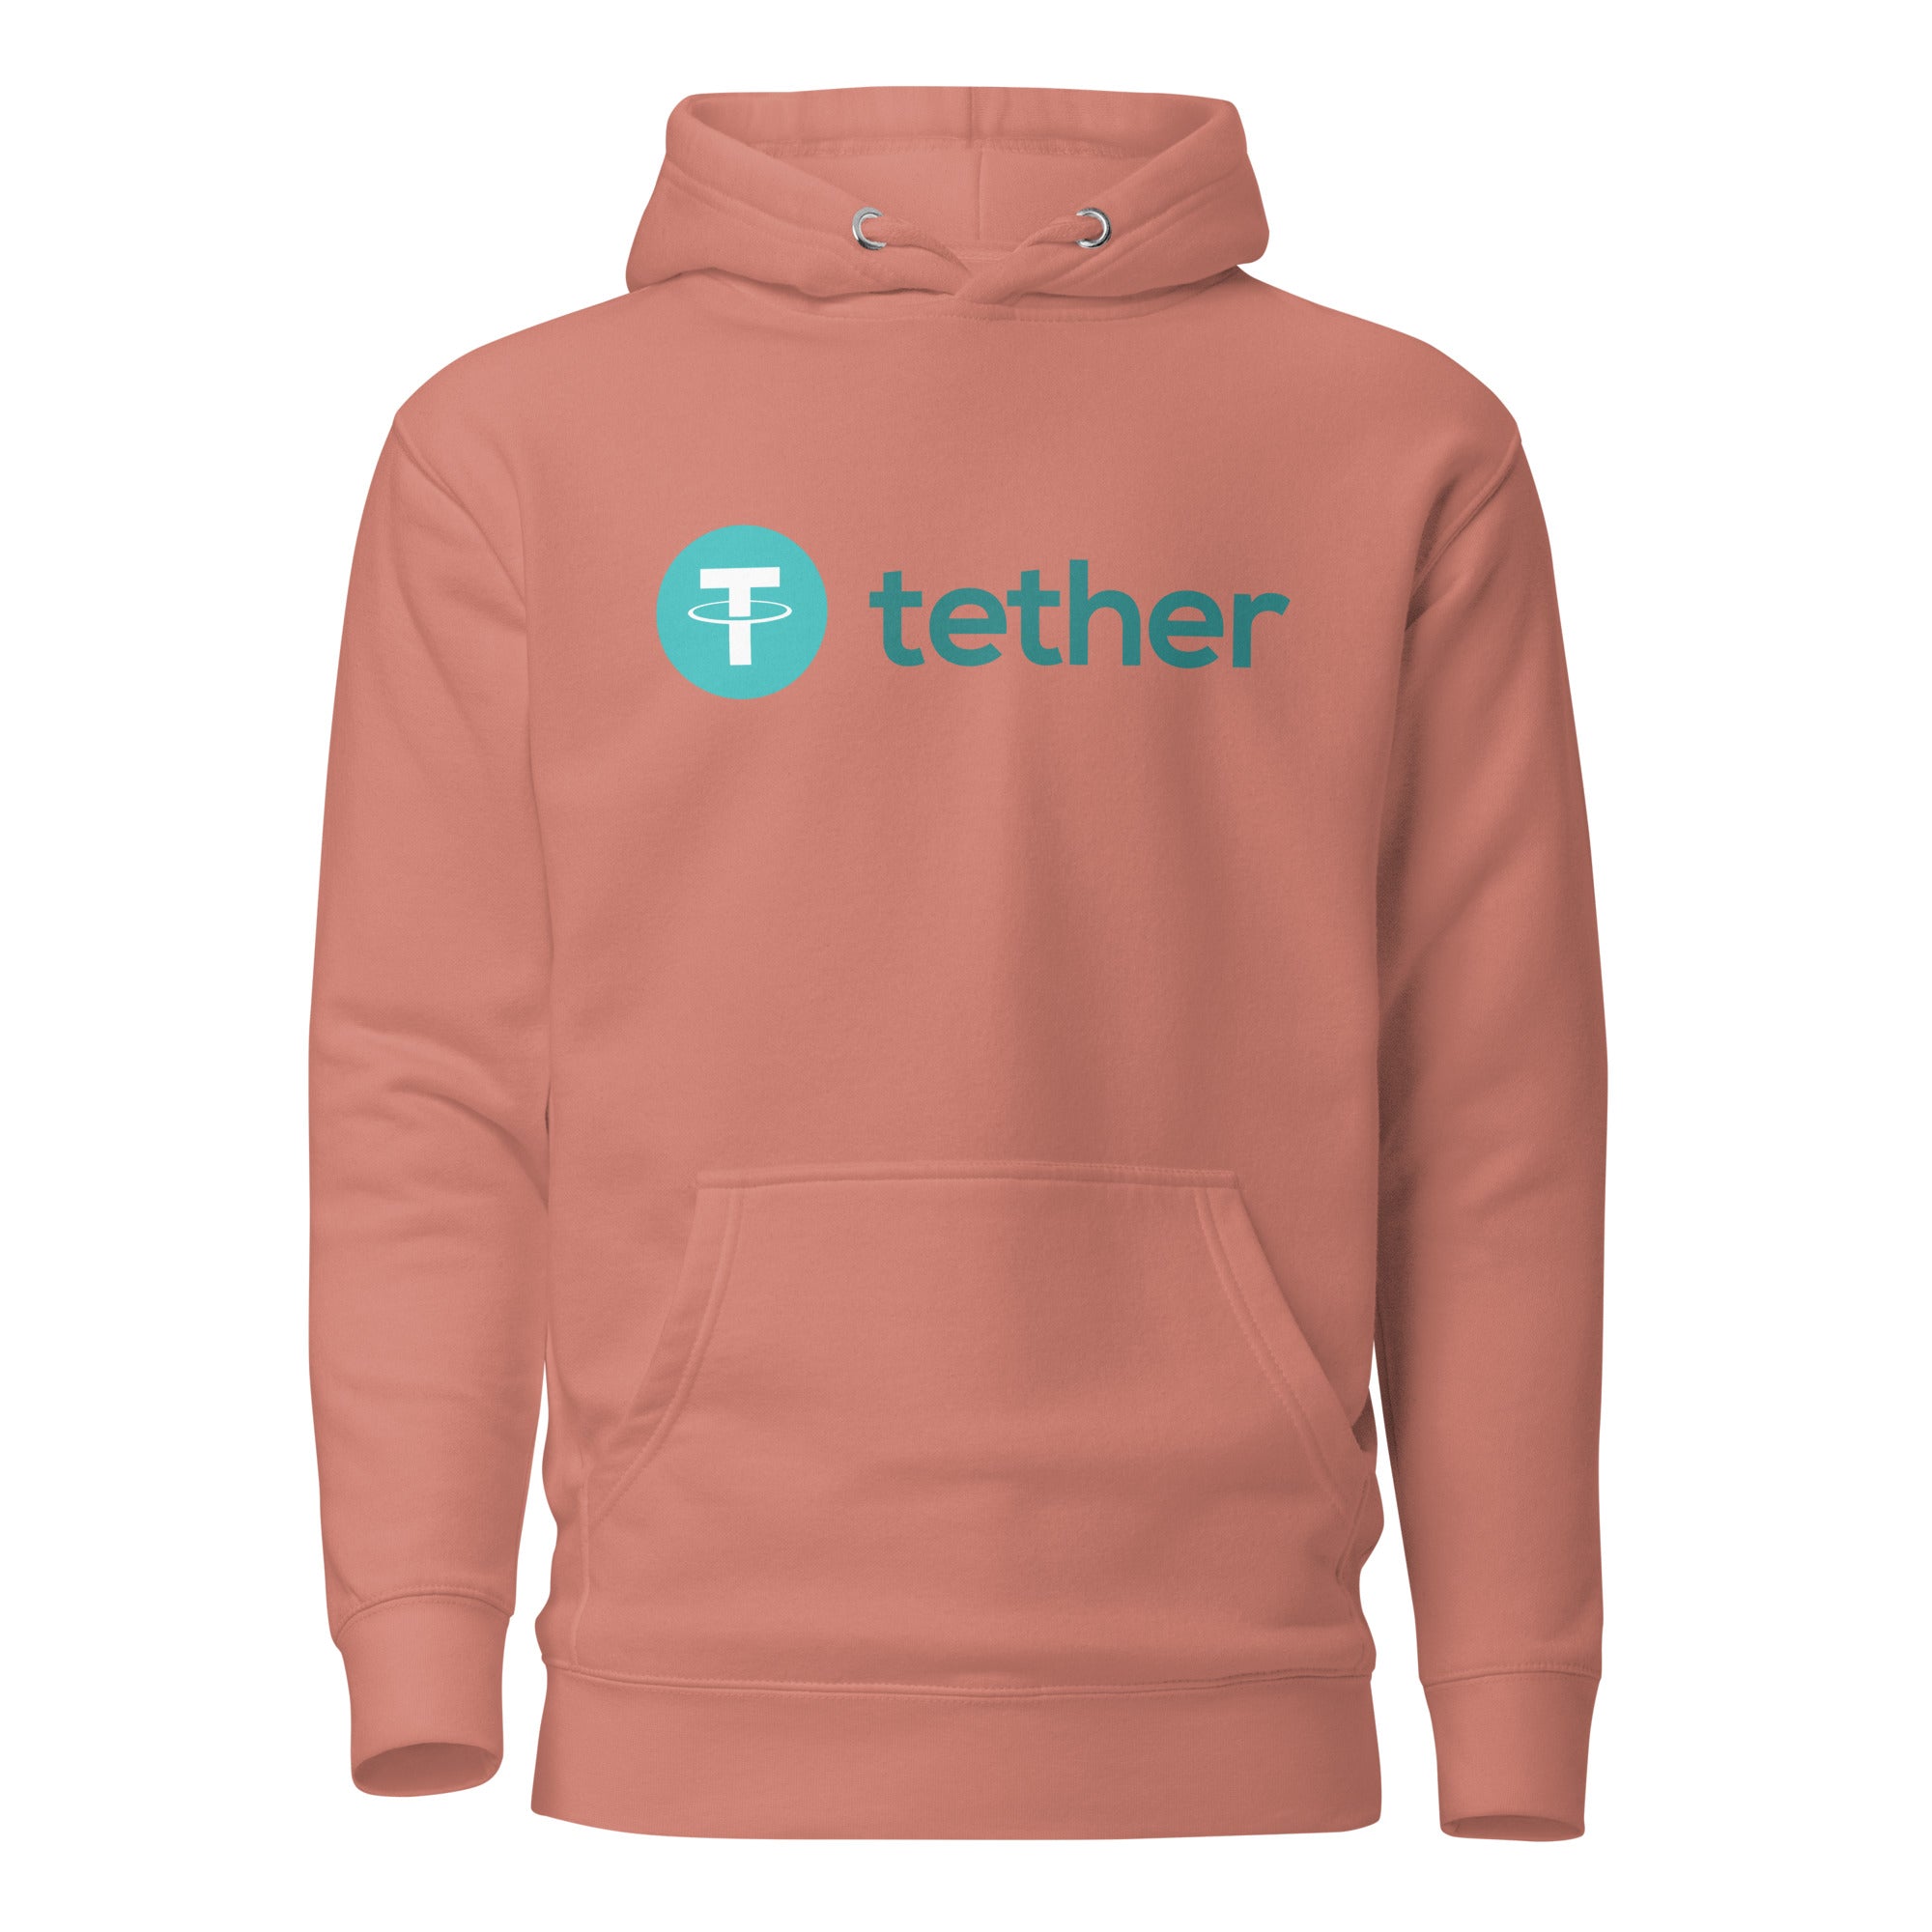 Unisex Premium Hoodie - Cotton Heritage - Tether Cryptocurrency Logo - GRAPHIC T-SHIRTS